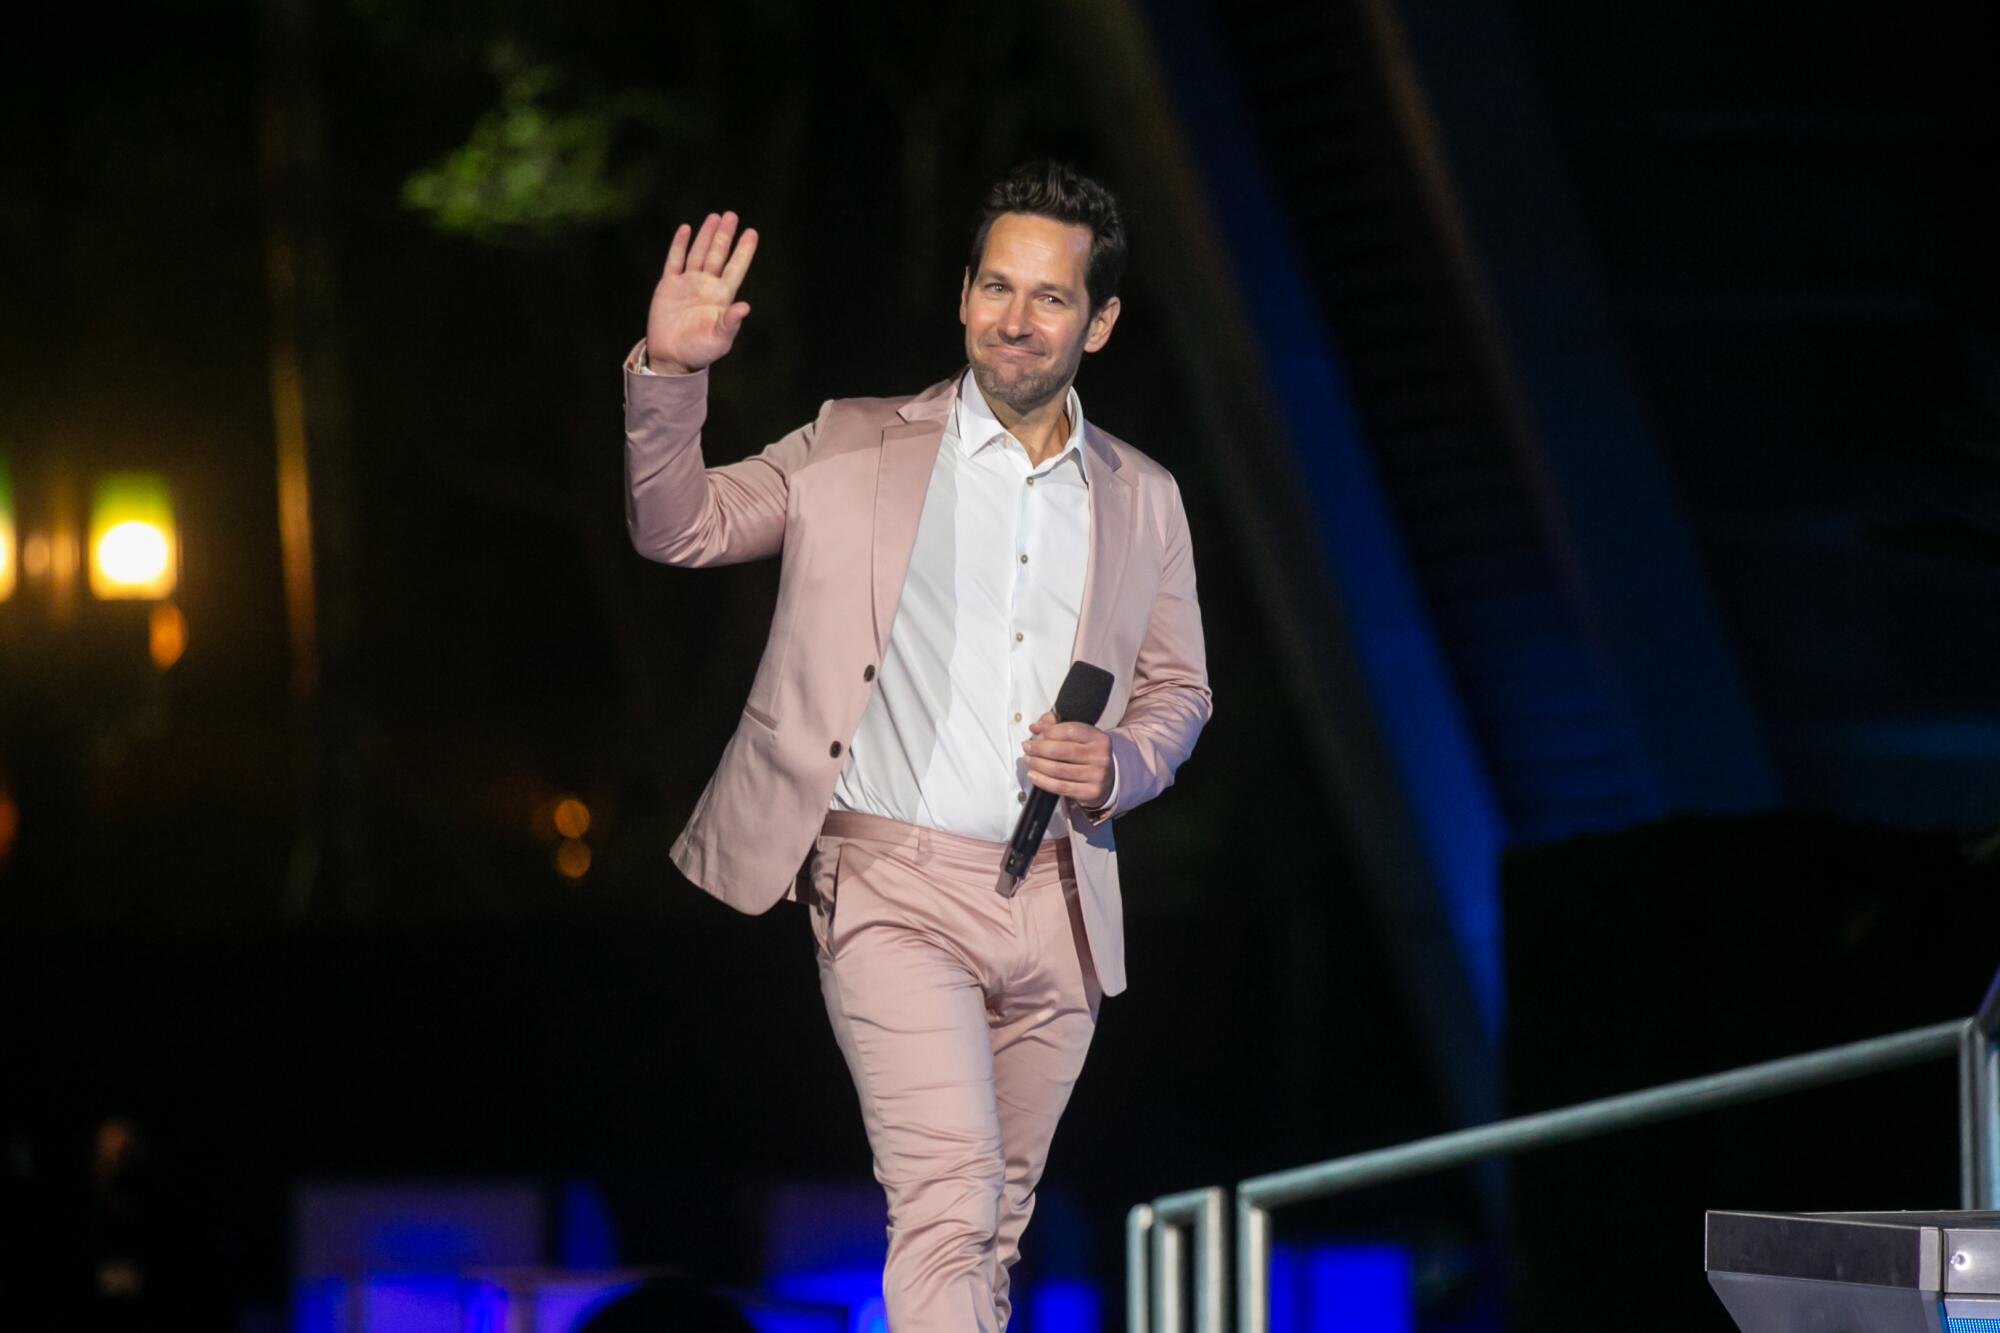 Paul Rudd, wearing a pink jacket and trousers, waves.